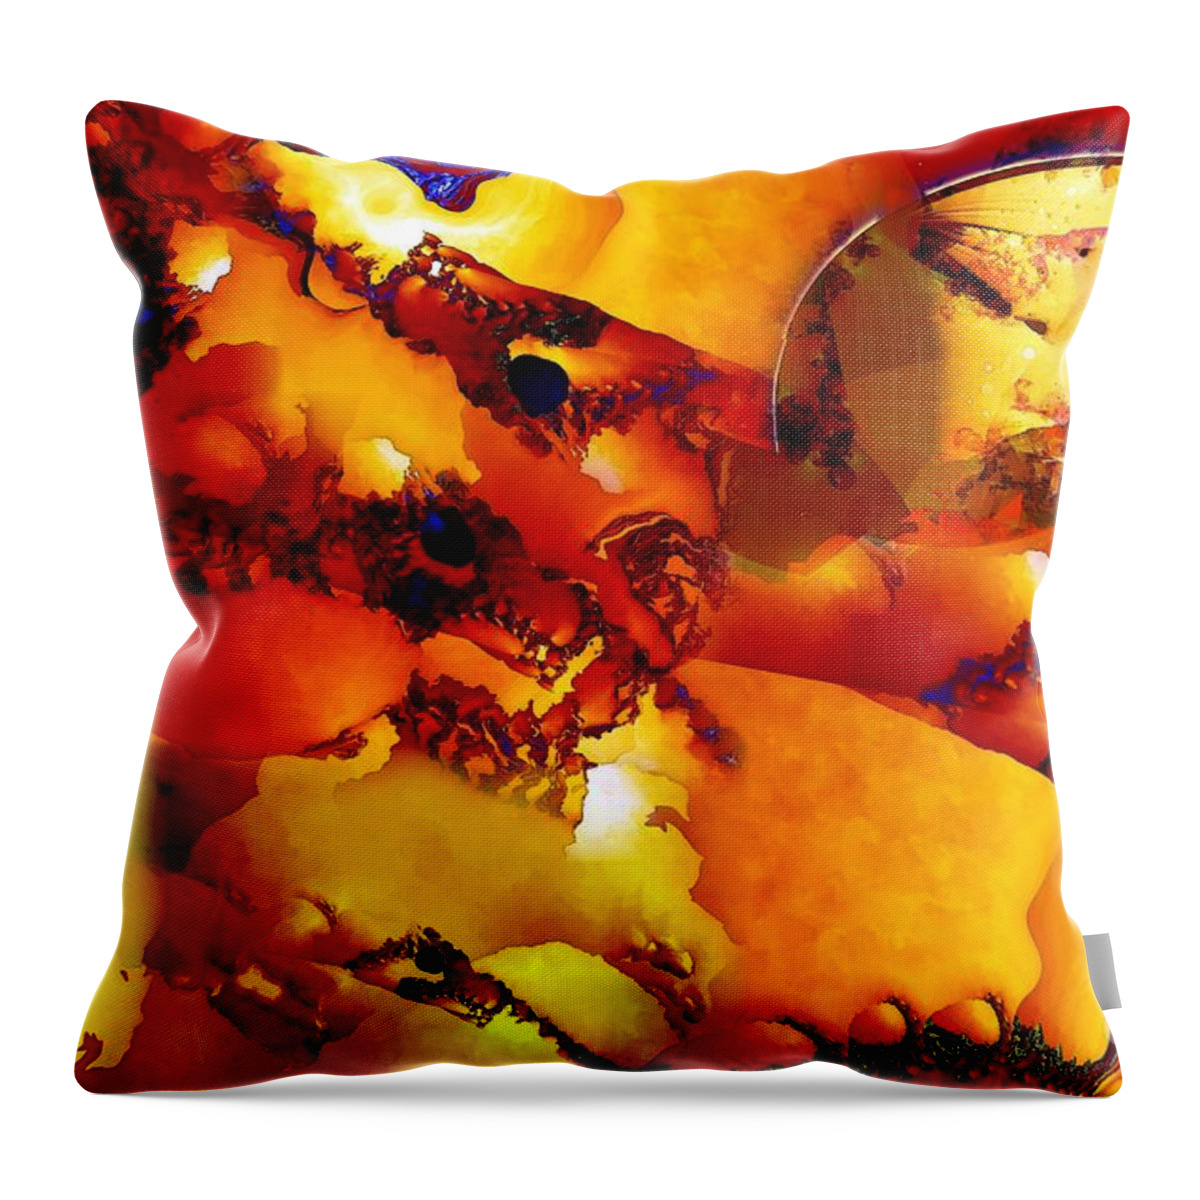 Abstract Throw Pillow featuring the digital art Southwest by Ronald Bissett